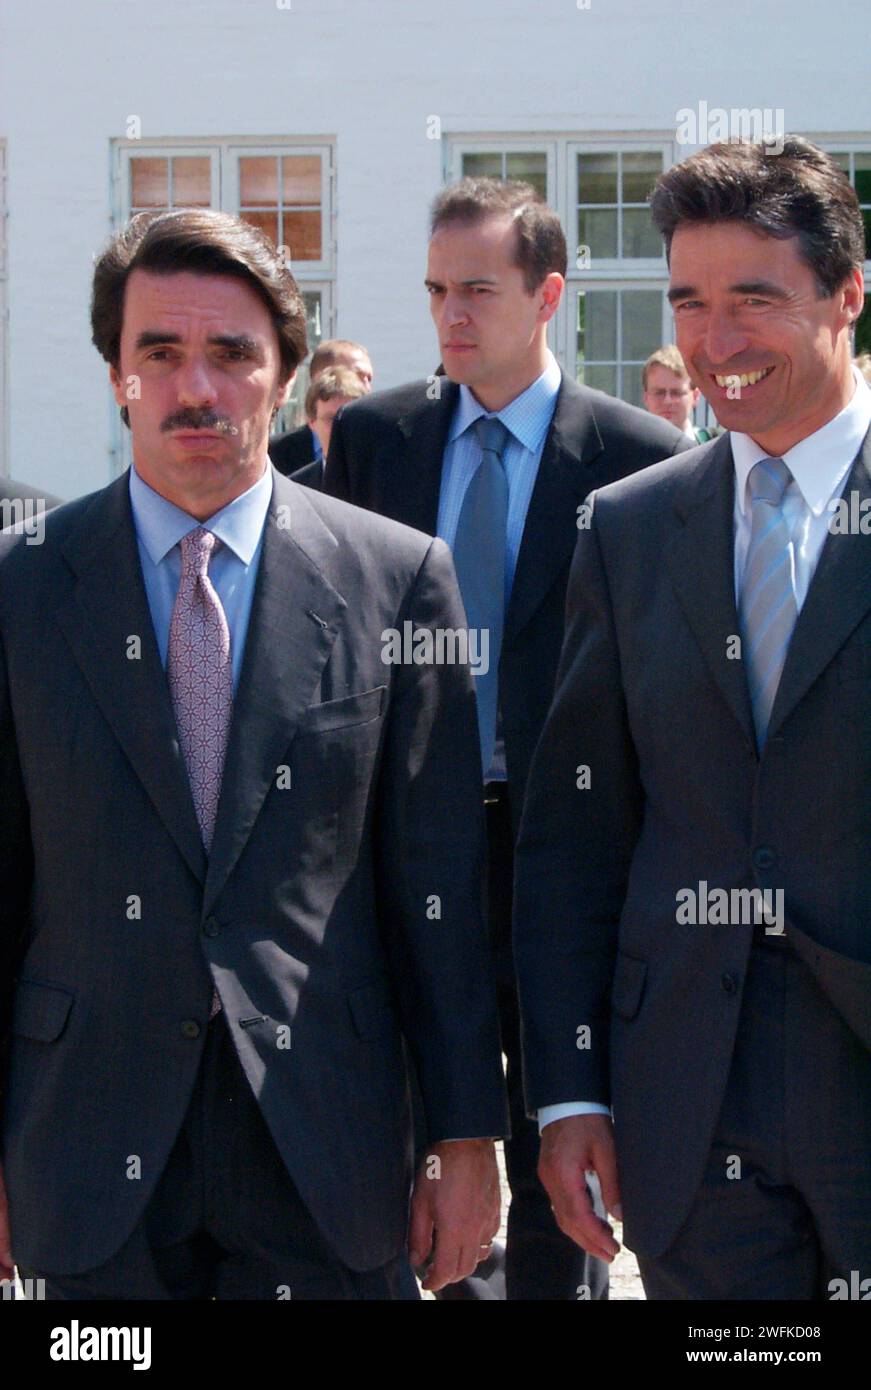 June 18,2002-Danish Prime minister Anders Fogh Rasmussen welcome Spanish Prime minister Jose Maria Aznar at Marienborg Lyngby,after talk bothe Prime minister hold joint press conference at Marienborg,Lyngby Denmark Stock Photo